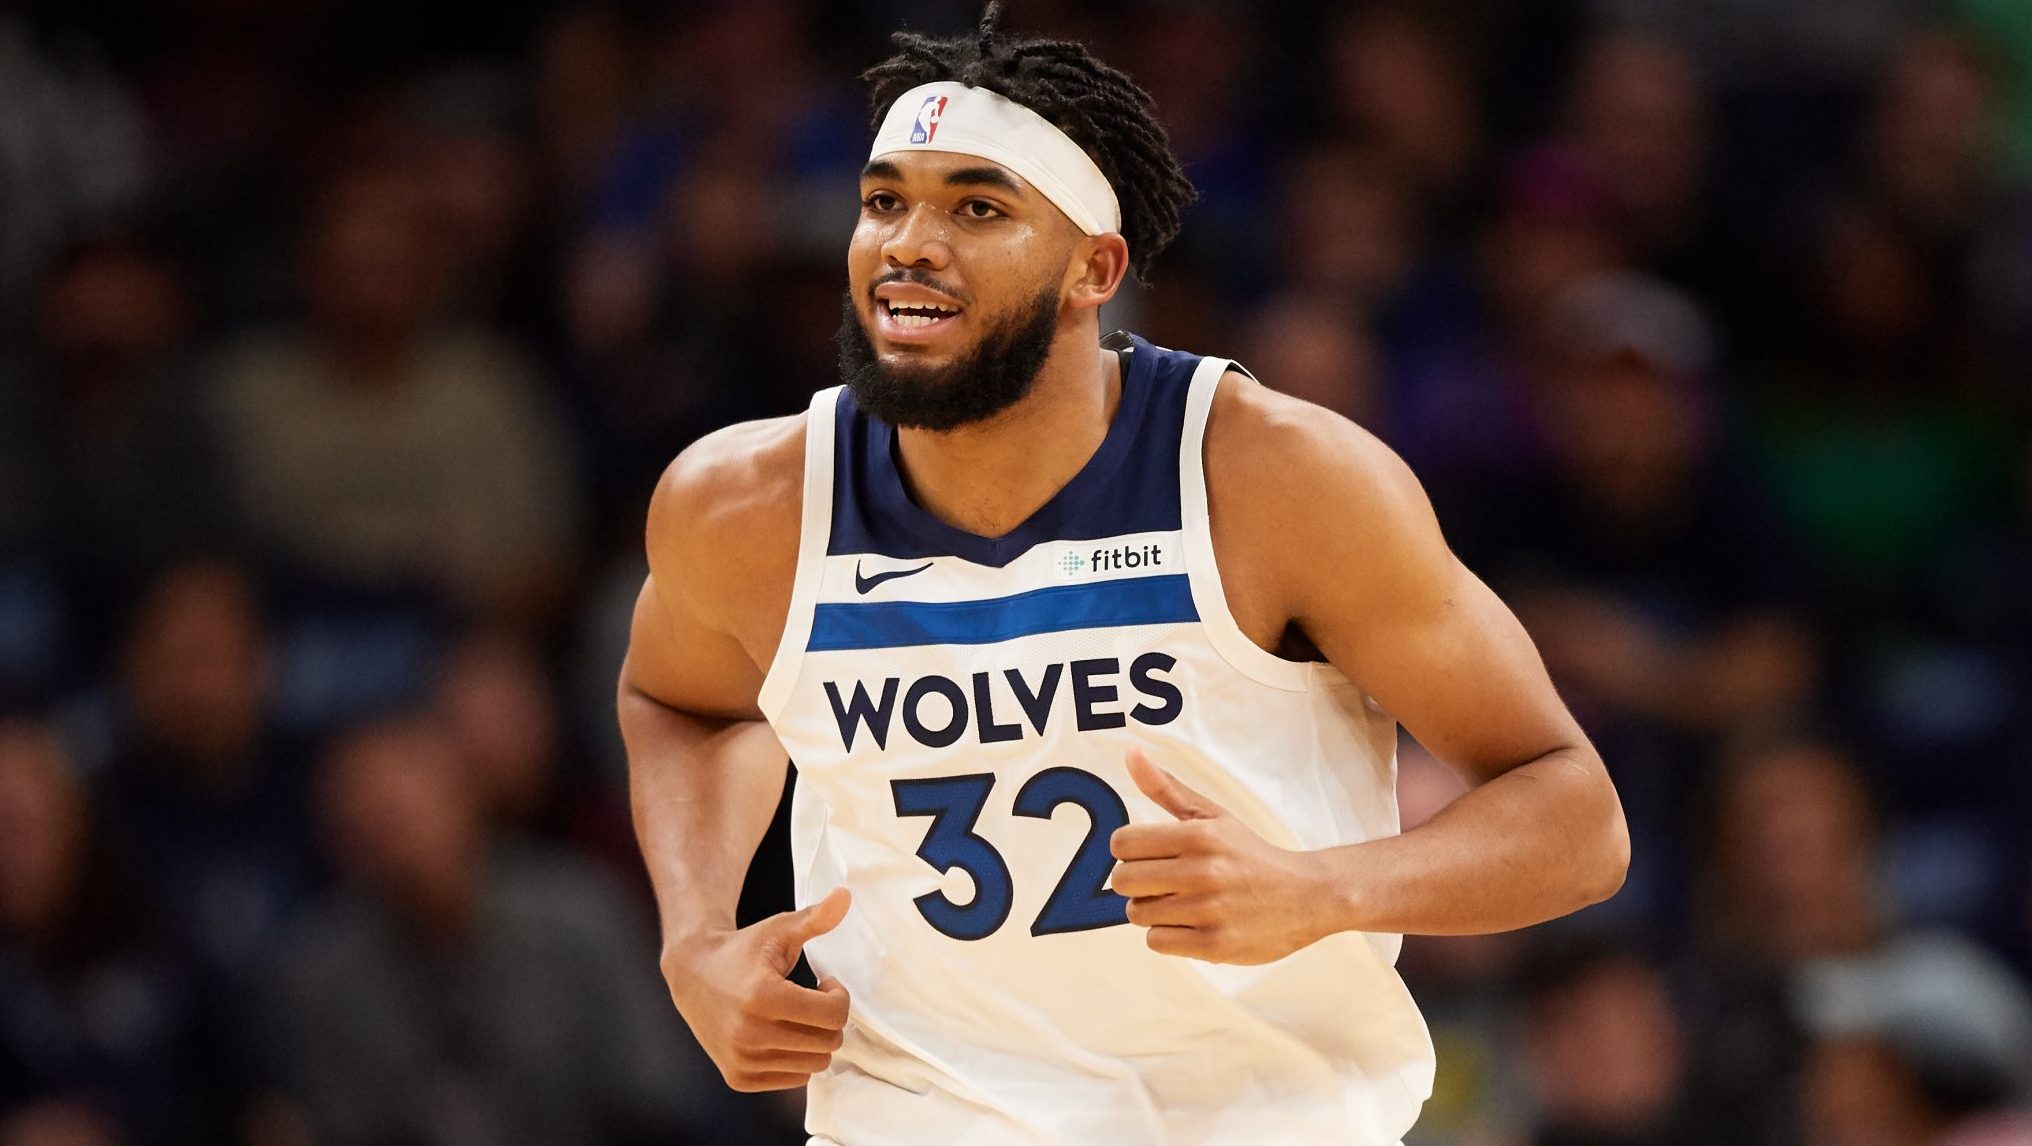 MINNEAPOLIS, MINNESOTA - OCTOBER 27: Karl-Anthony Towns #32 of the Minnesota Timberwolves runs down the court against the Miami Heat during the home opener at Target Center on October 27, 2019 in Minneapolis, Minnesota. The Timberwolves defeated the Heat 116-109. NOTE TO USER: User expressly acknowledges and agrees that, by downloading and or using this Photograph, user is consenting to the terms and conditions of the Getty Images License Agreement.